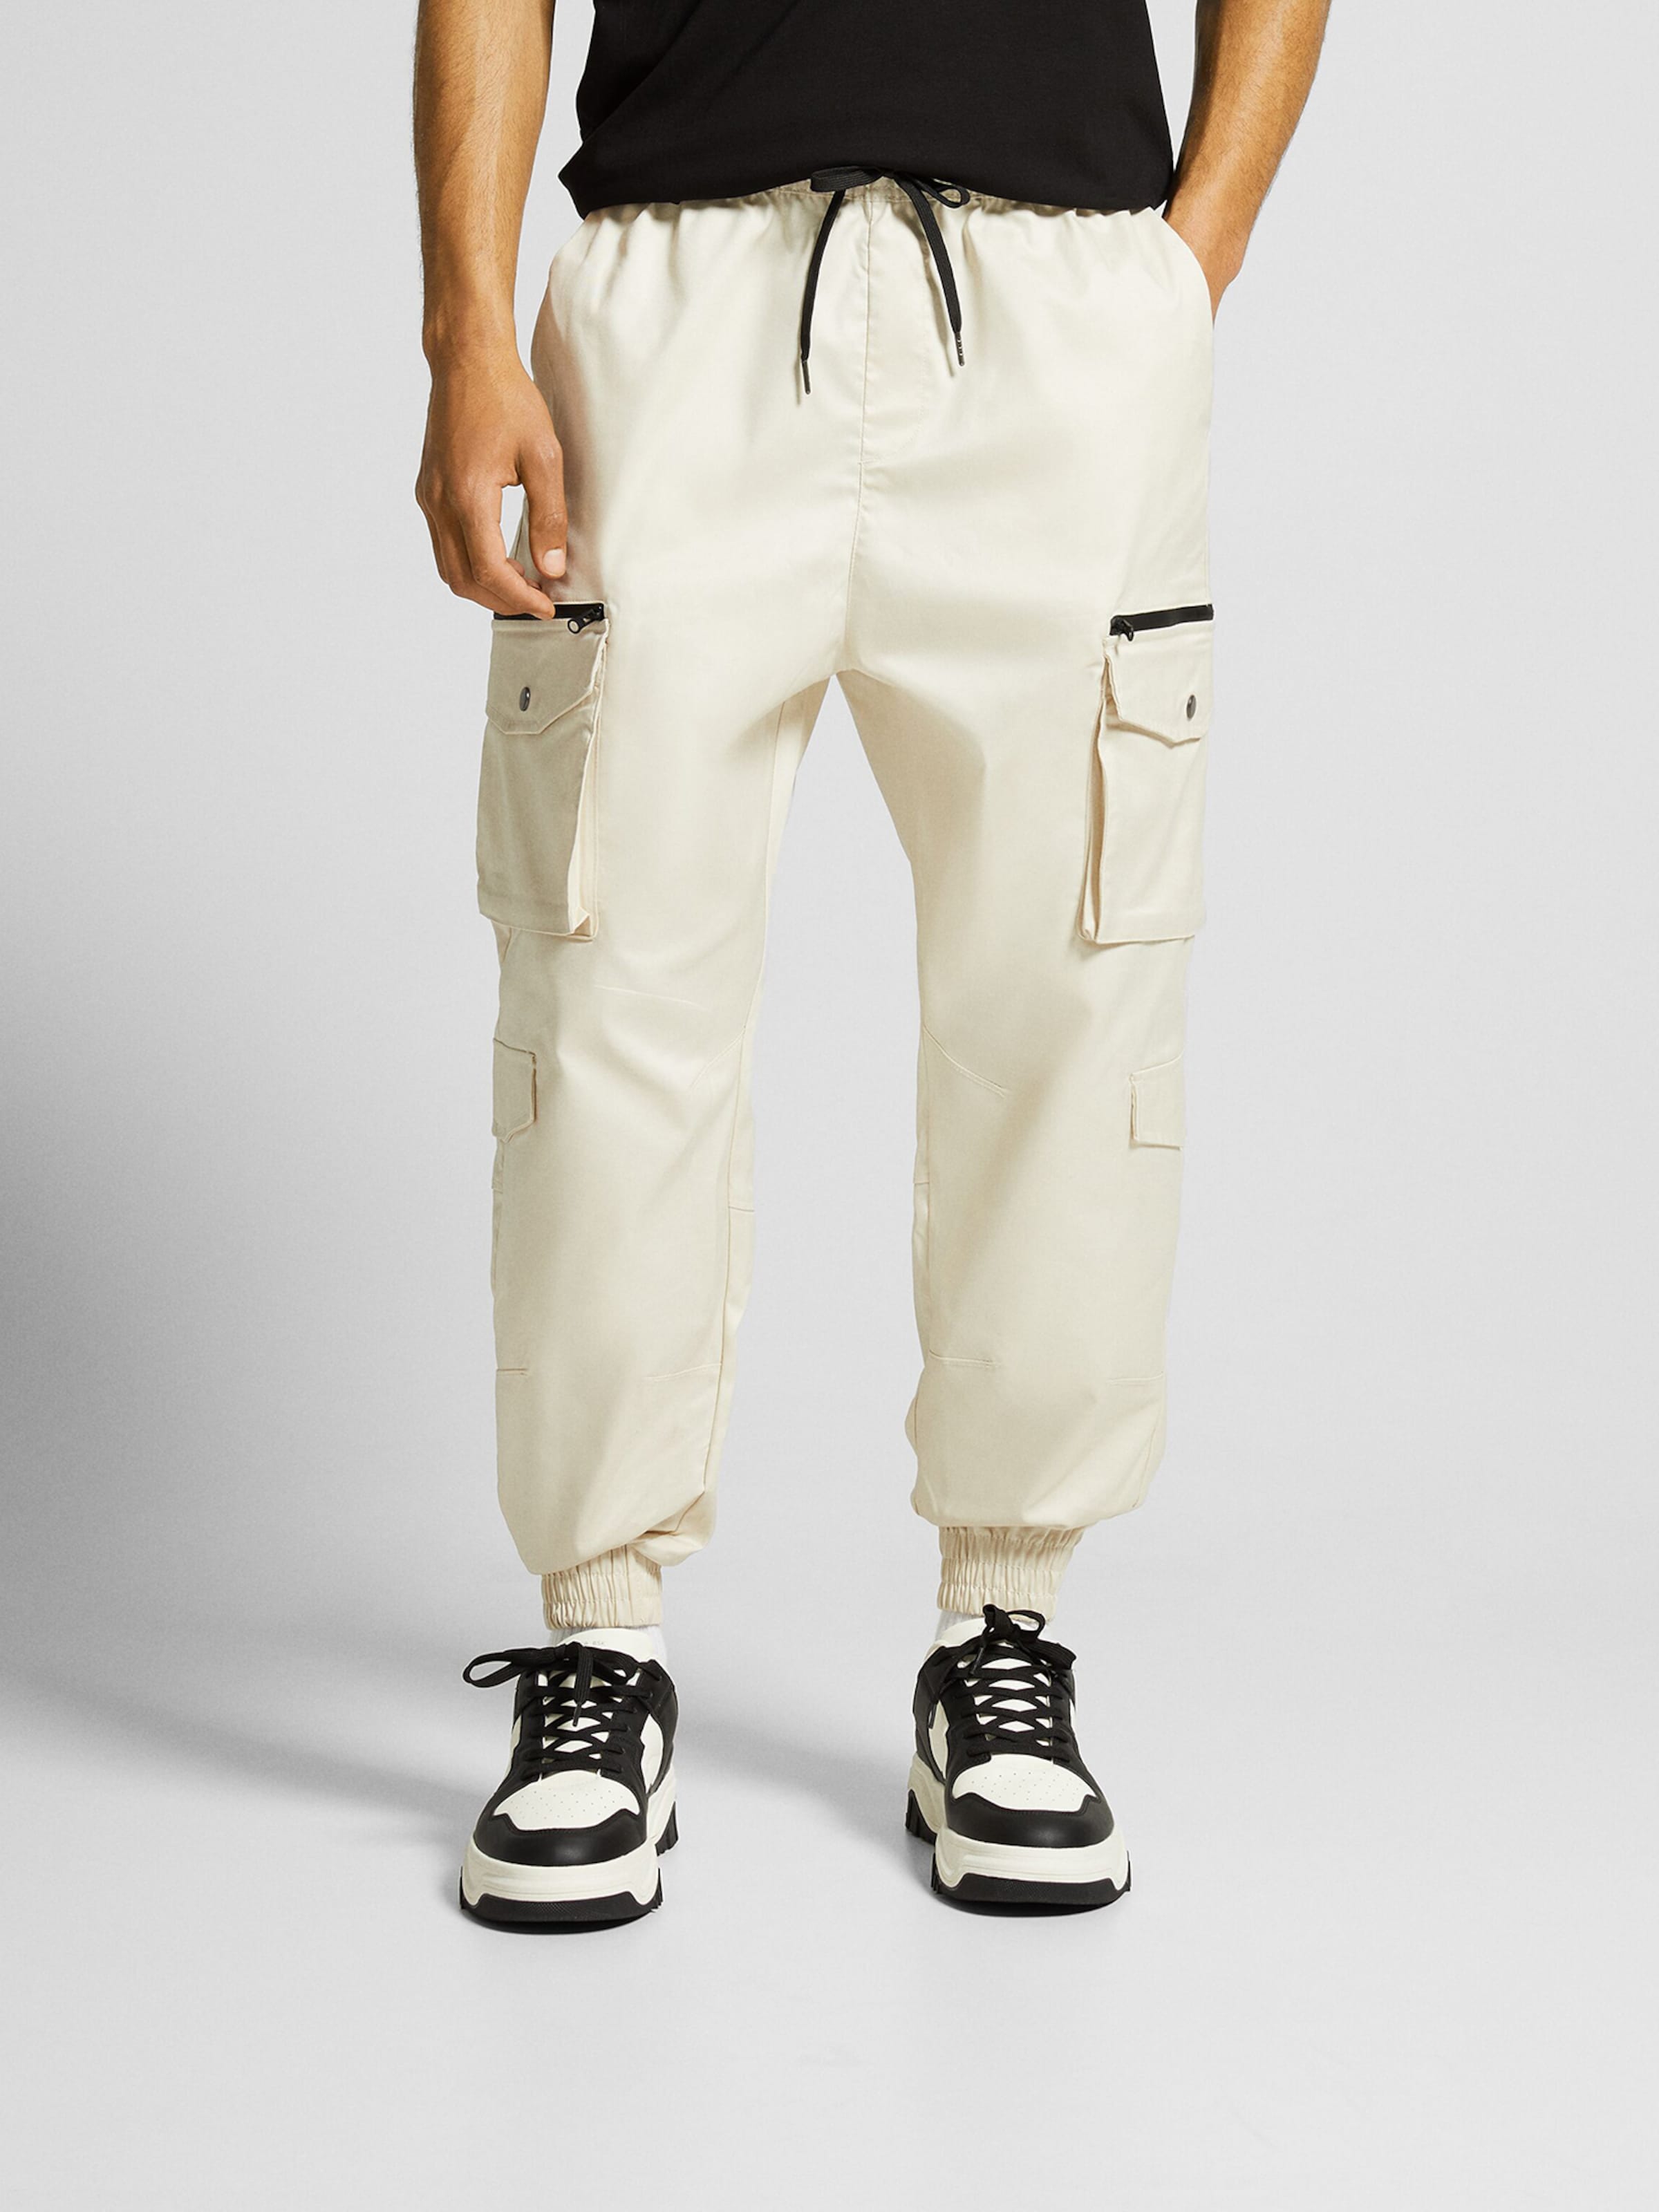 Topstoney Designer Stone Cargo Pants For Men High End Streetwear Overalls Bershka  Cargo Trousers In Three Colors For Youth And Fashionable Men Sprin2603 From  Tnjzm, $102.98 | DHgate.Com